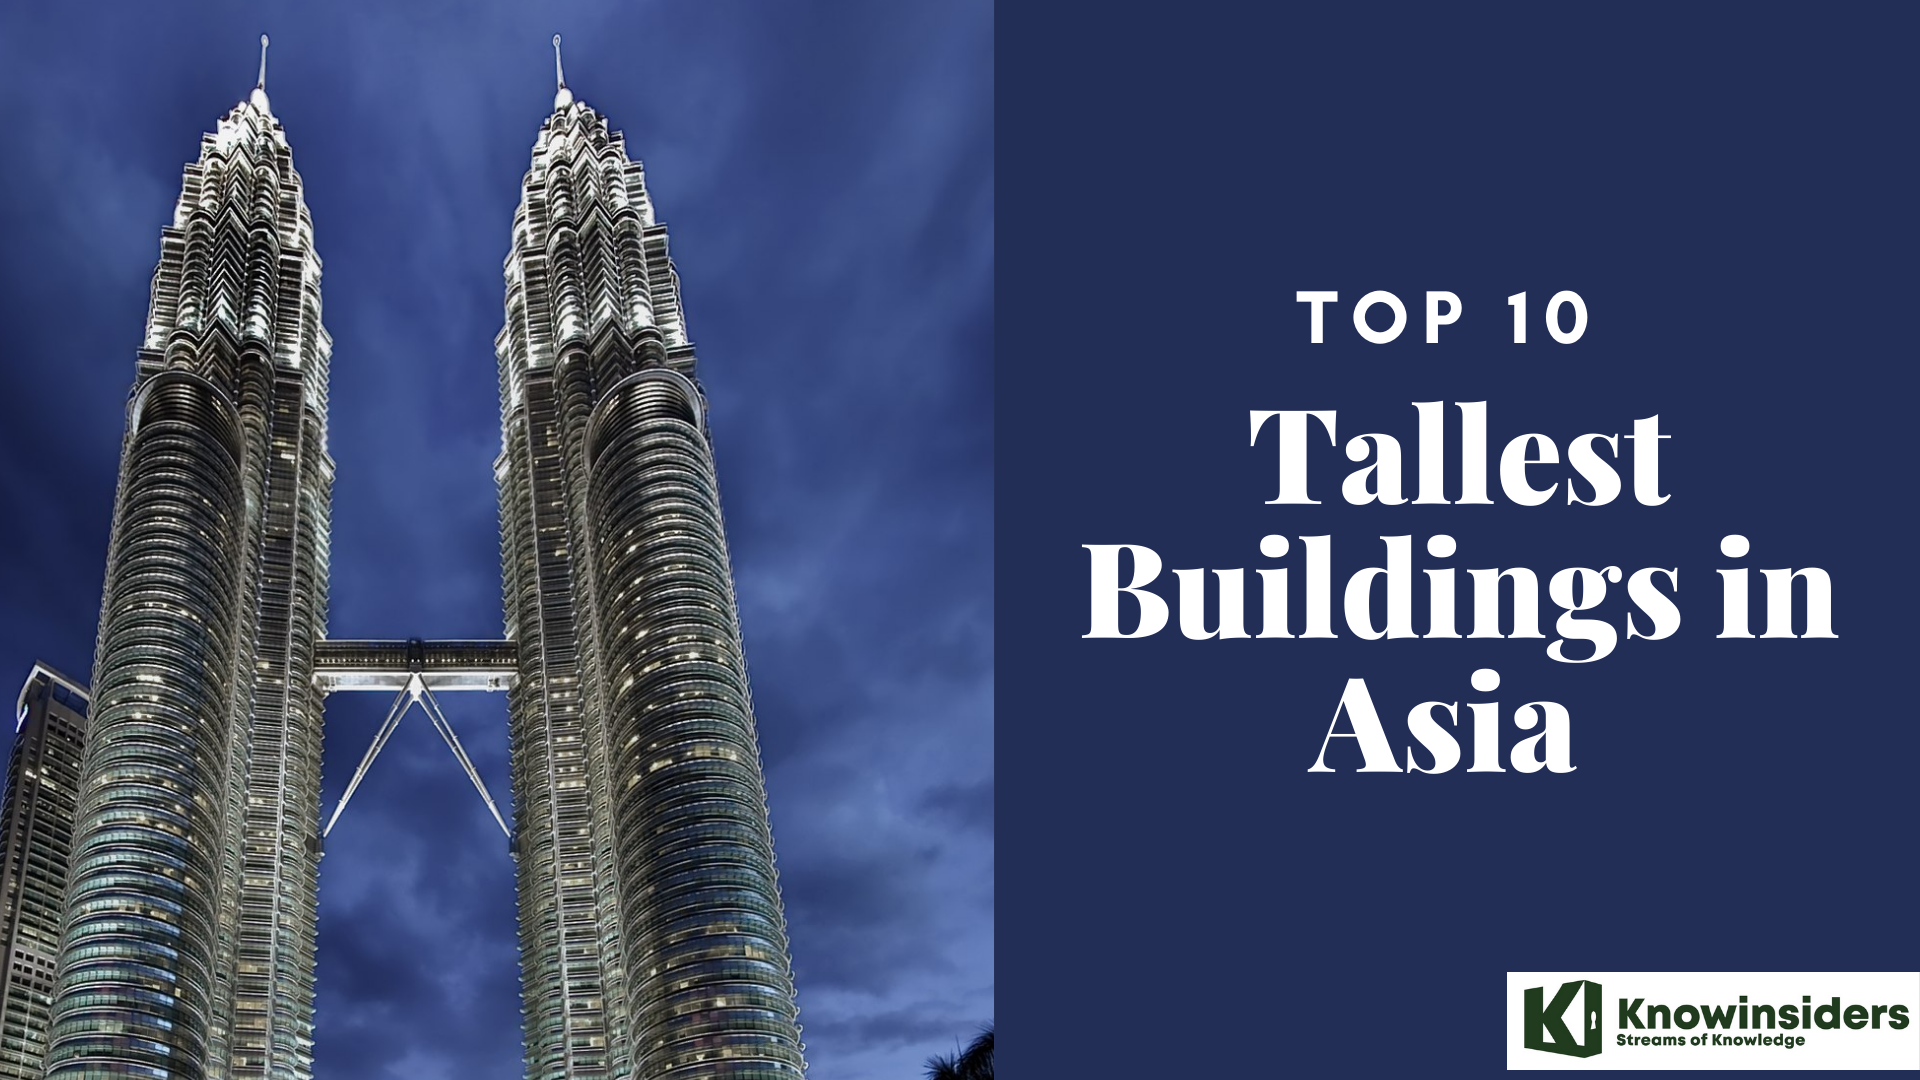 Top 10 Tallest and Most Beautiful Building In Asia